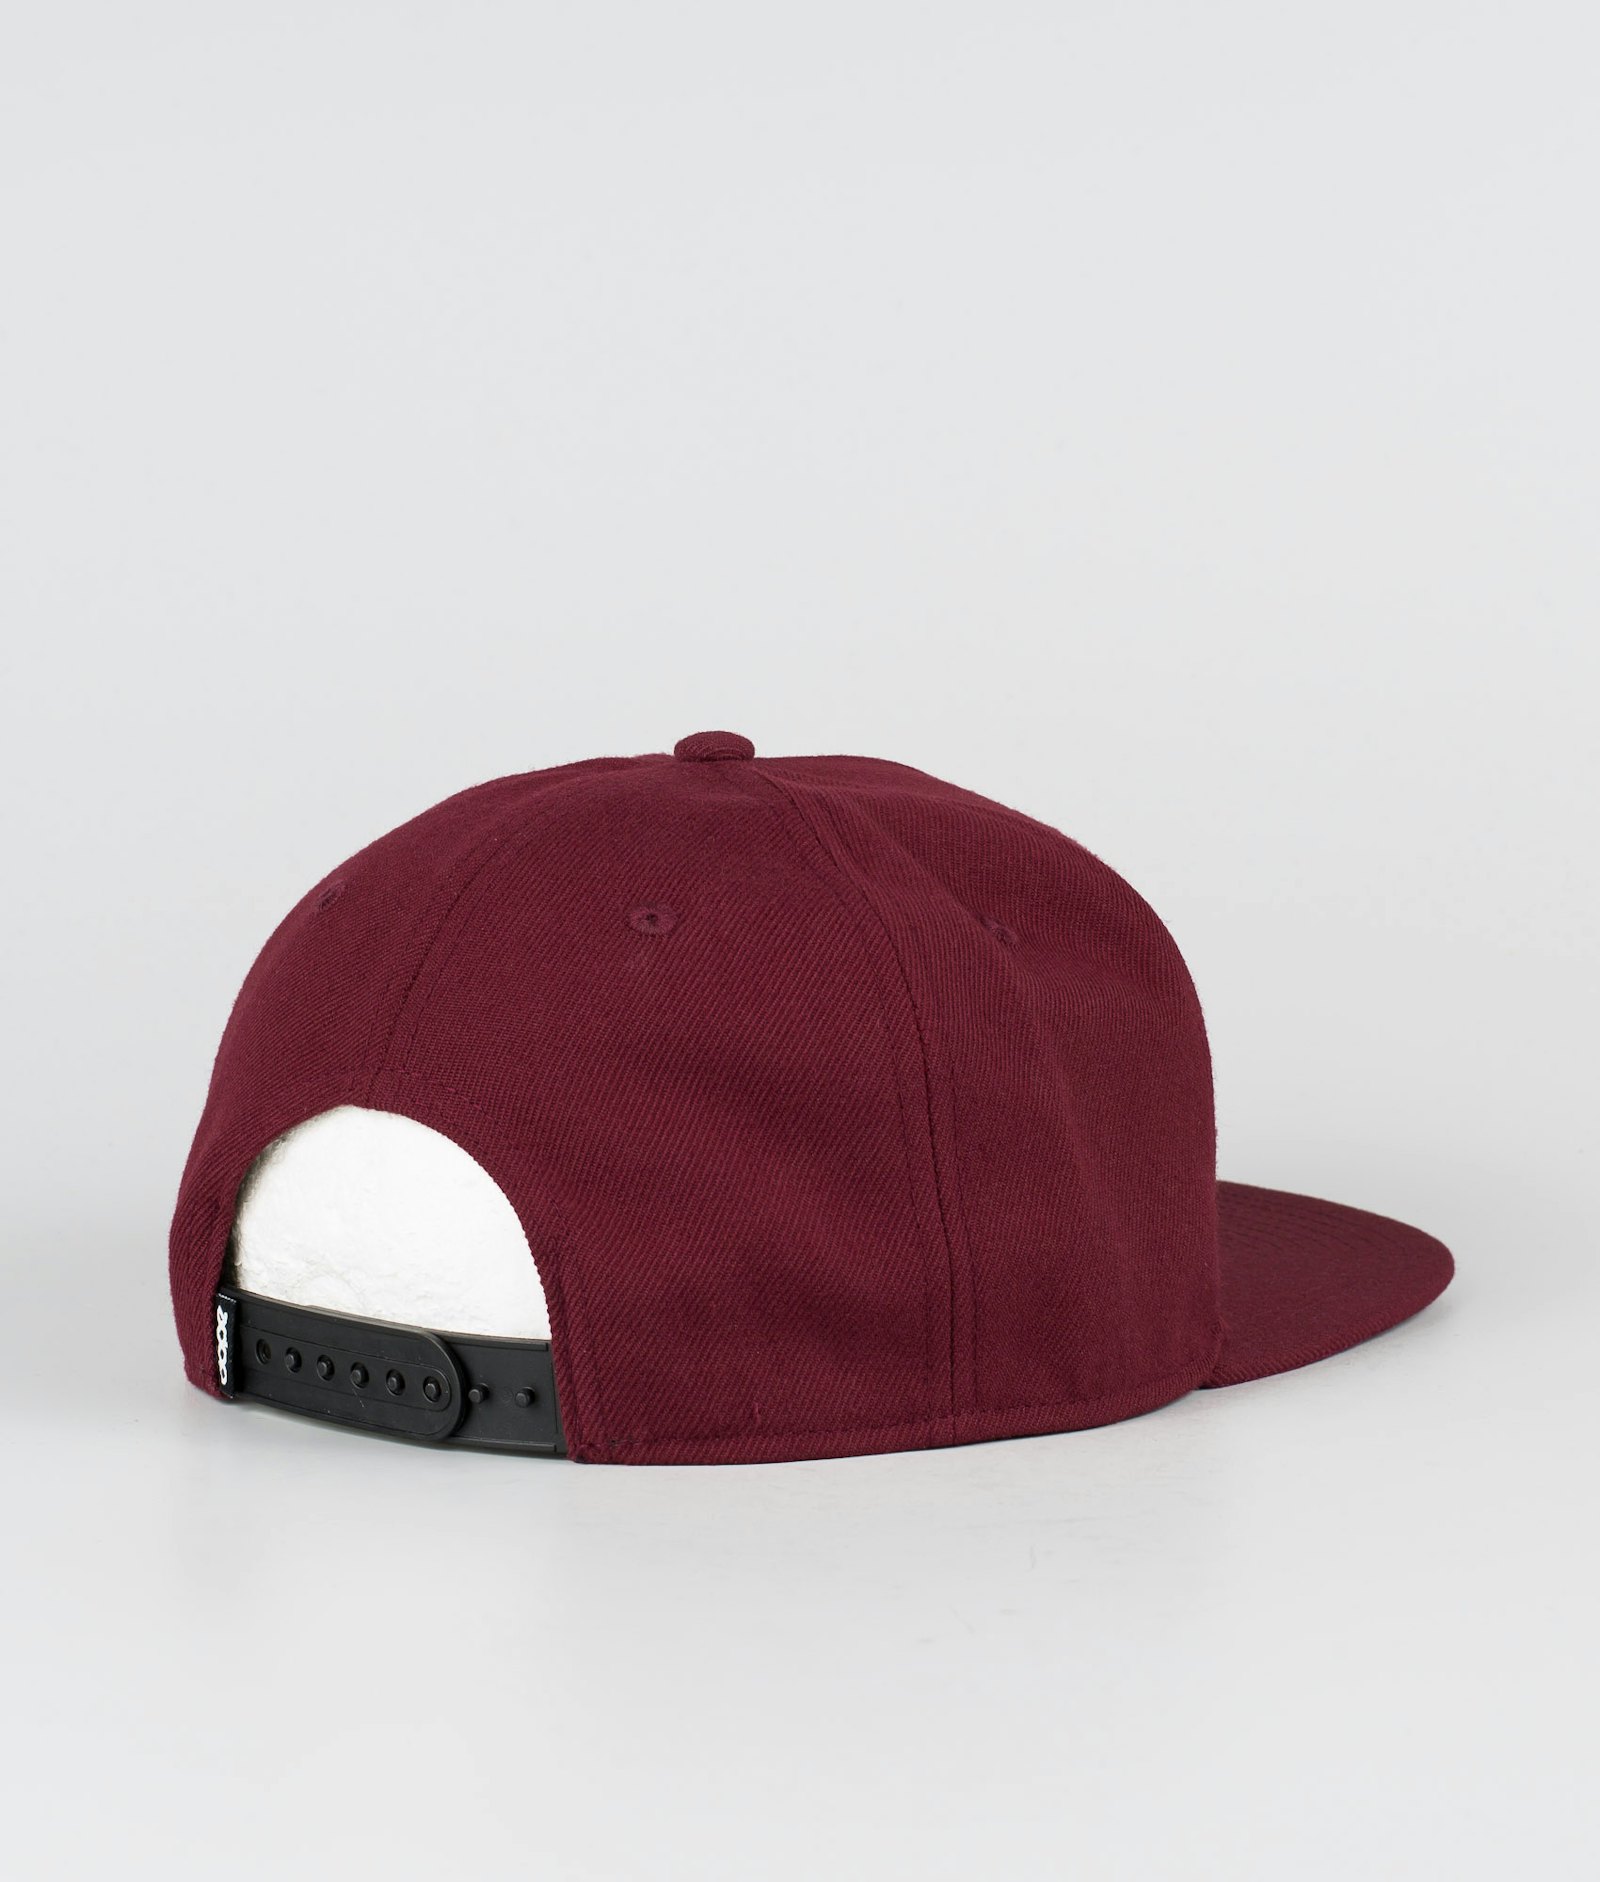 Dope Patched Caps Burgundy